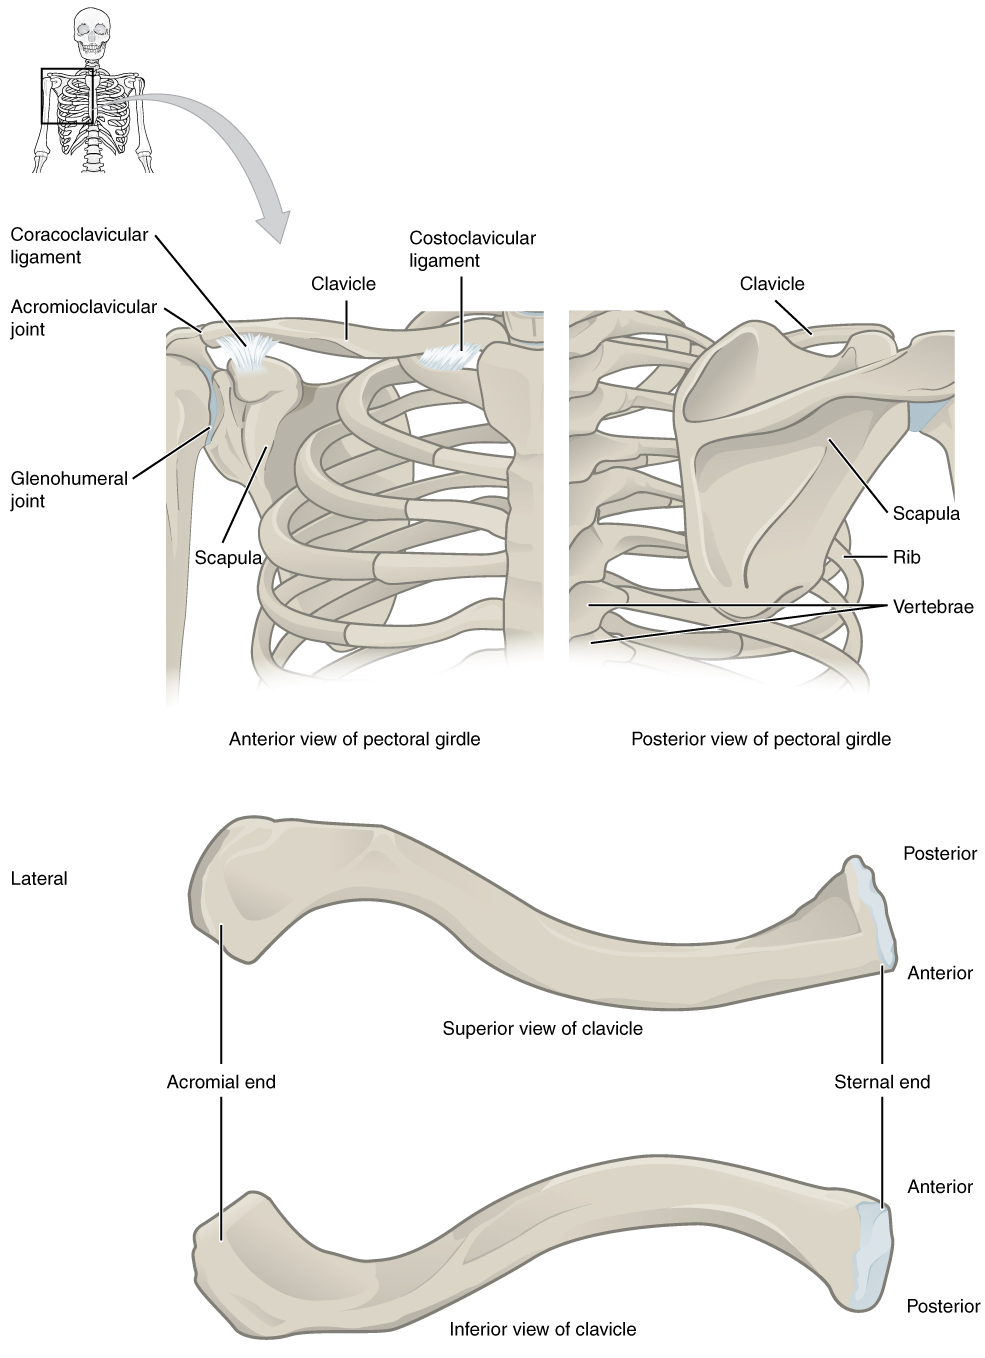 Anterior and posterior views of the pectoral girdle; Superior and inferior views of a right clavicle